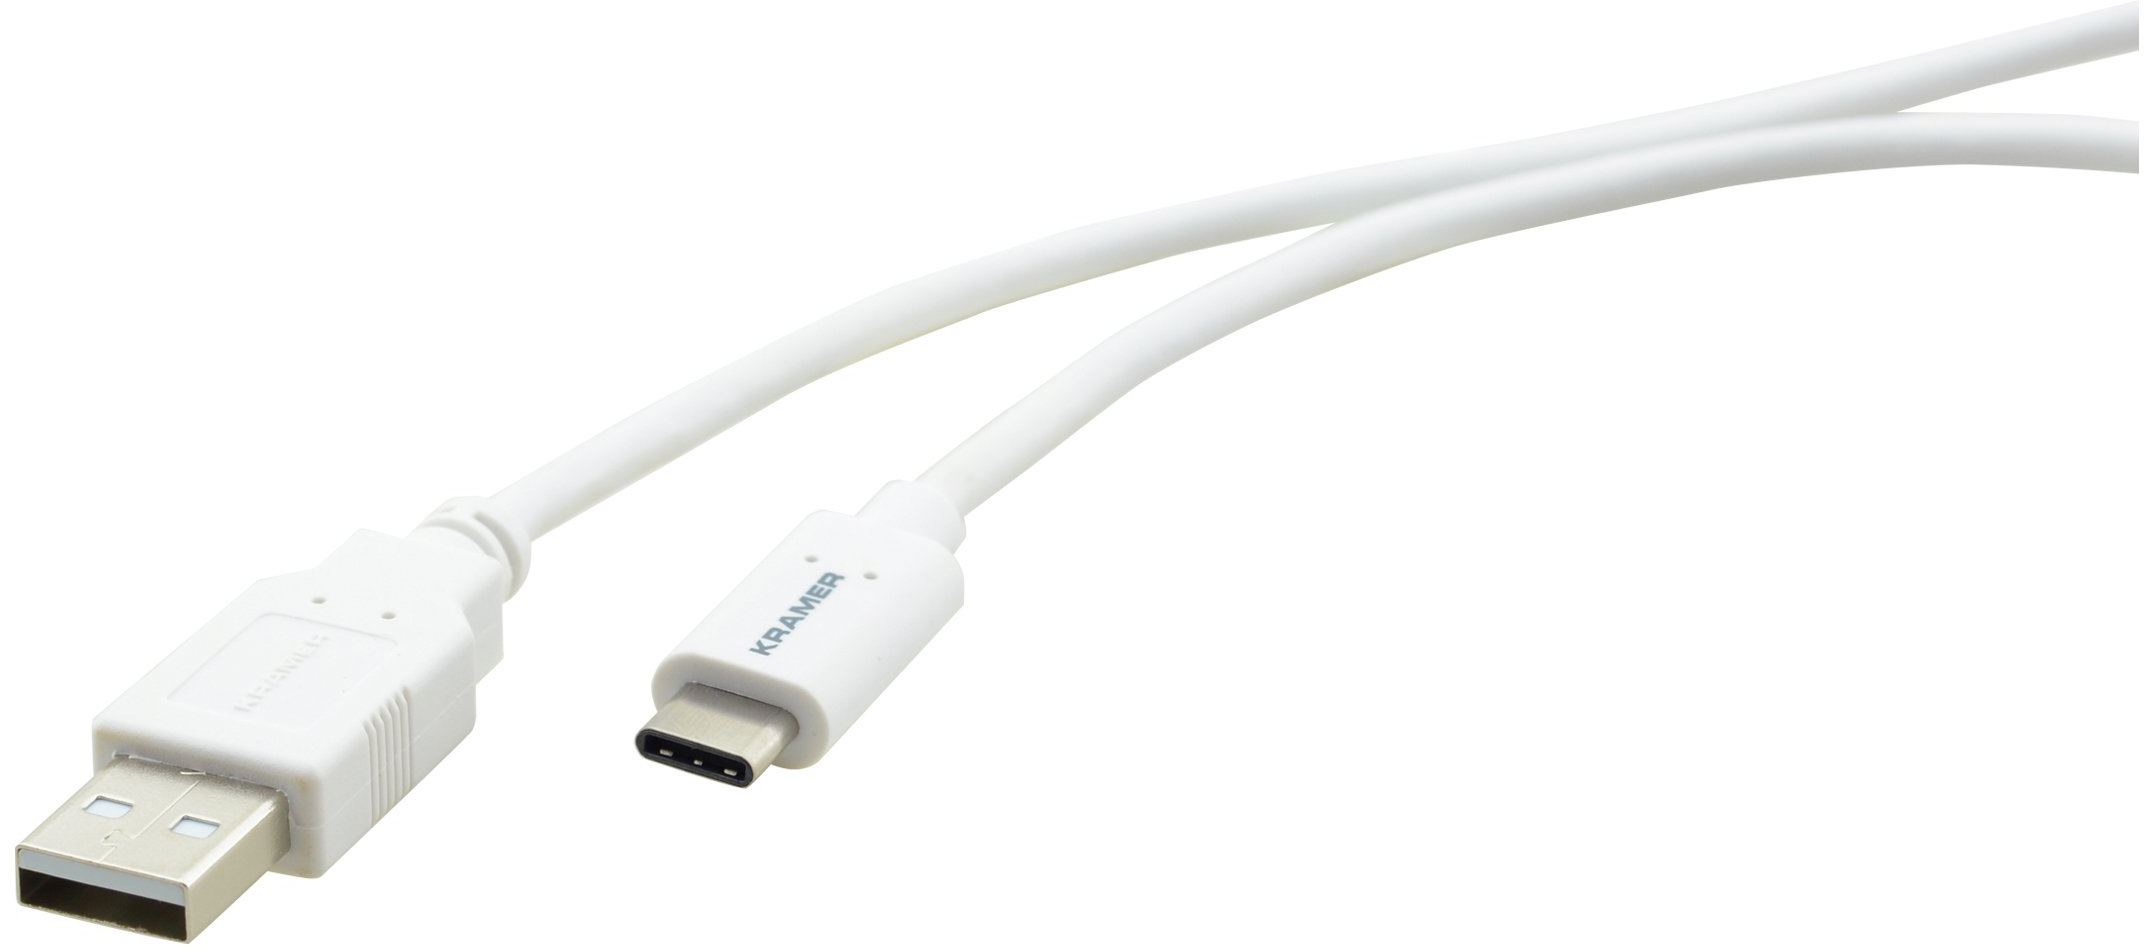 You Recently Viewed Kramer USB 2.0 USB–C(M) to USB–A(M) Cable Image